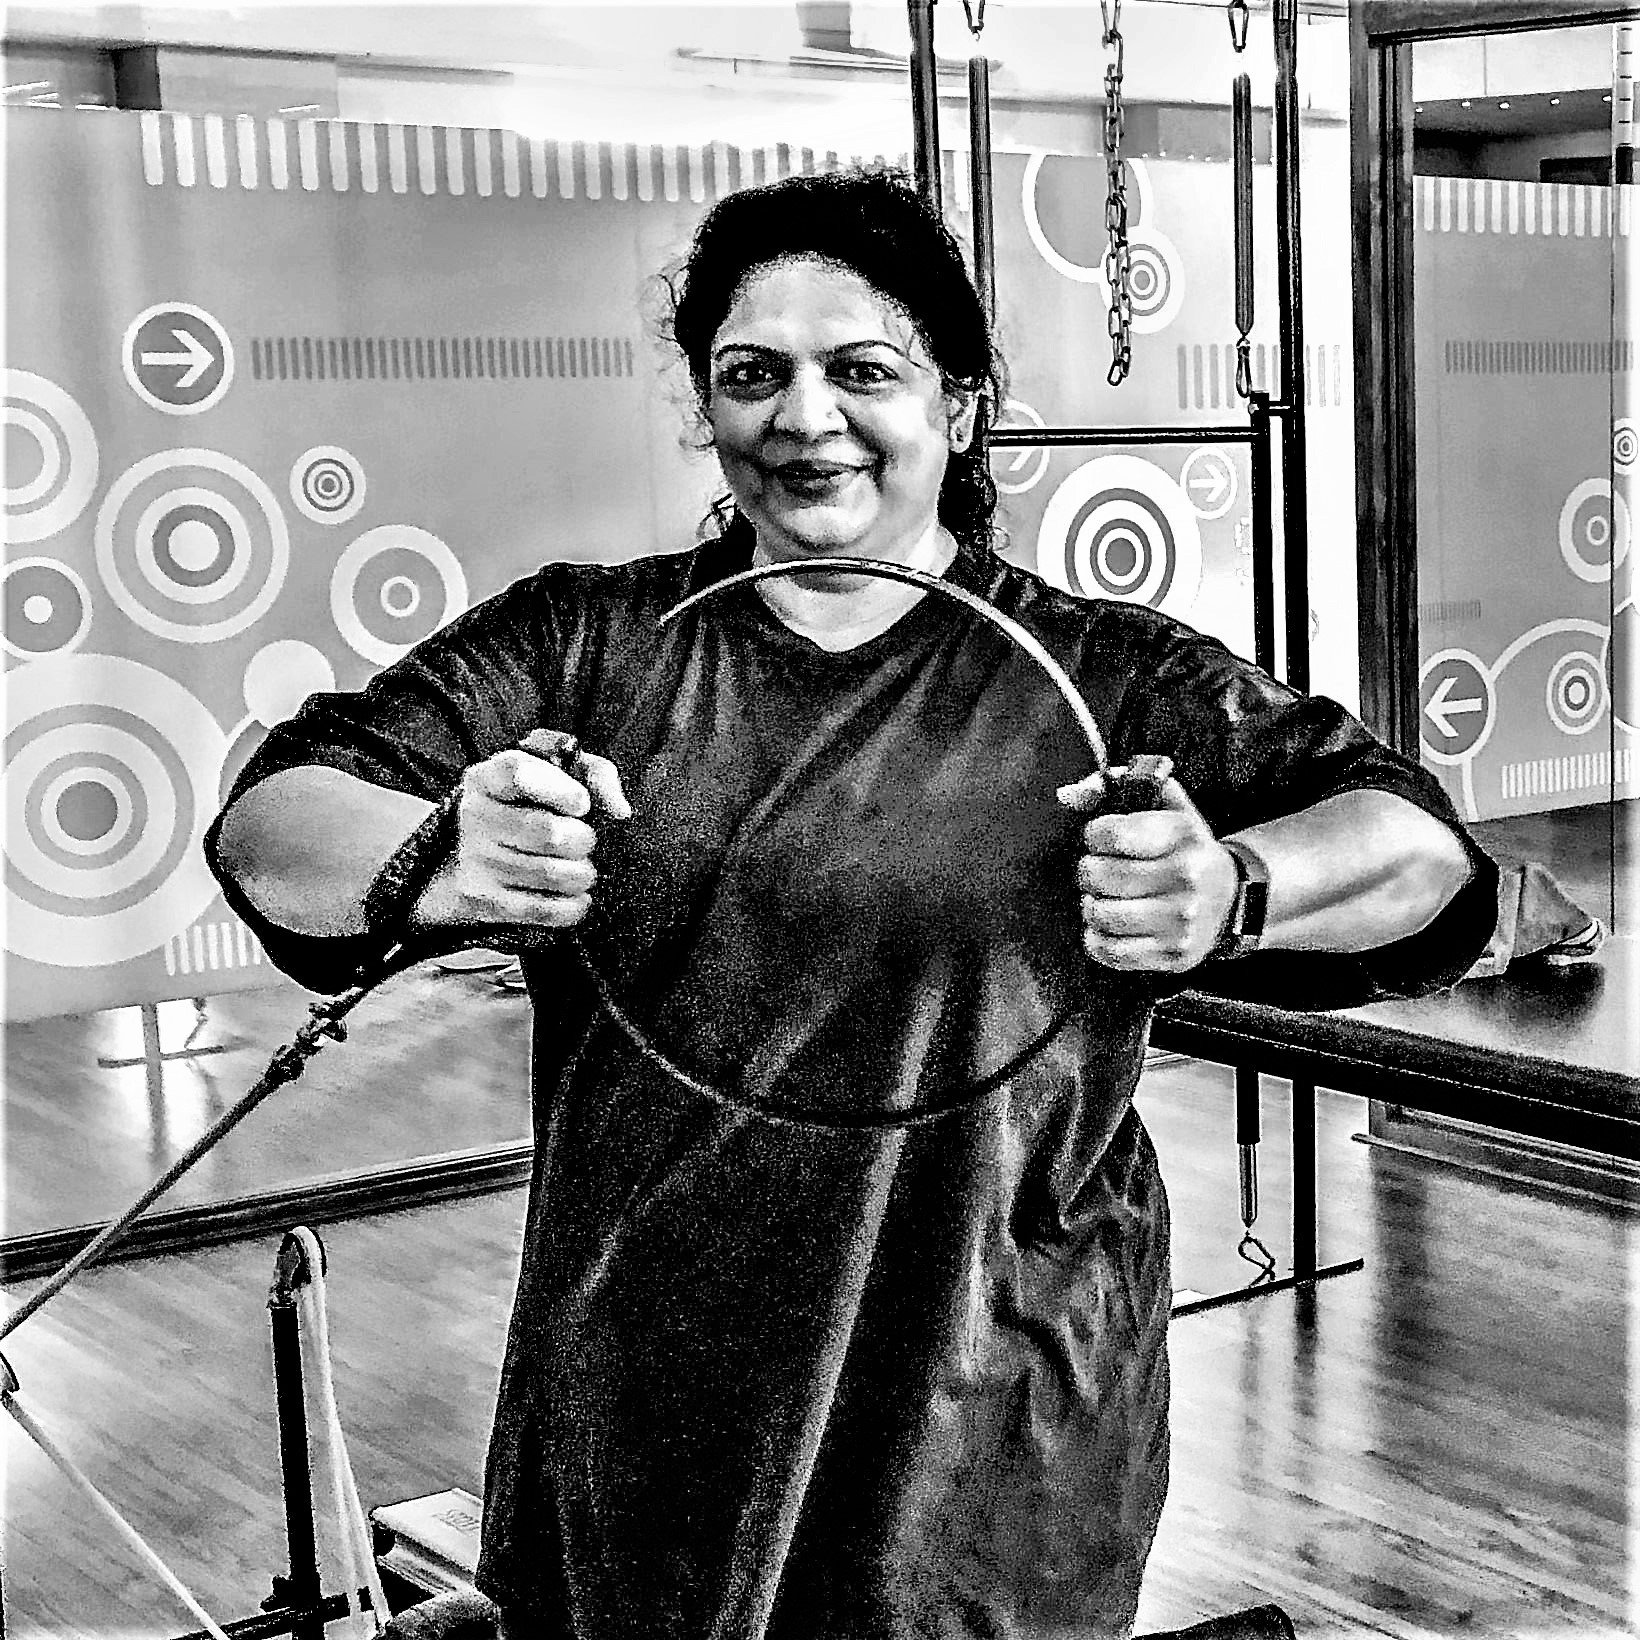 Pilates personal training workouts at The Zone. Designed by Anjali Sareen to recover post injury and strengthen core, improve posture.